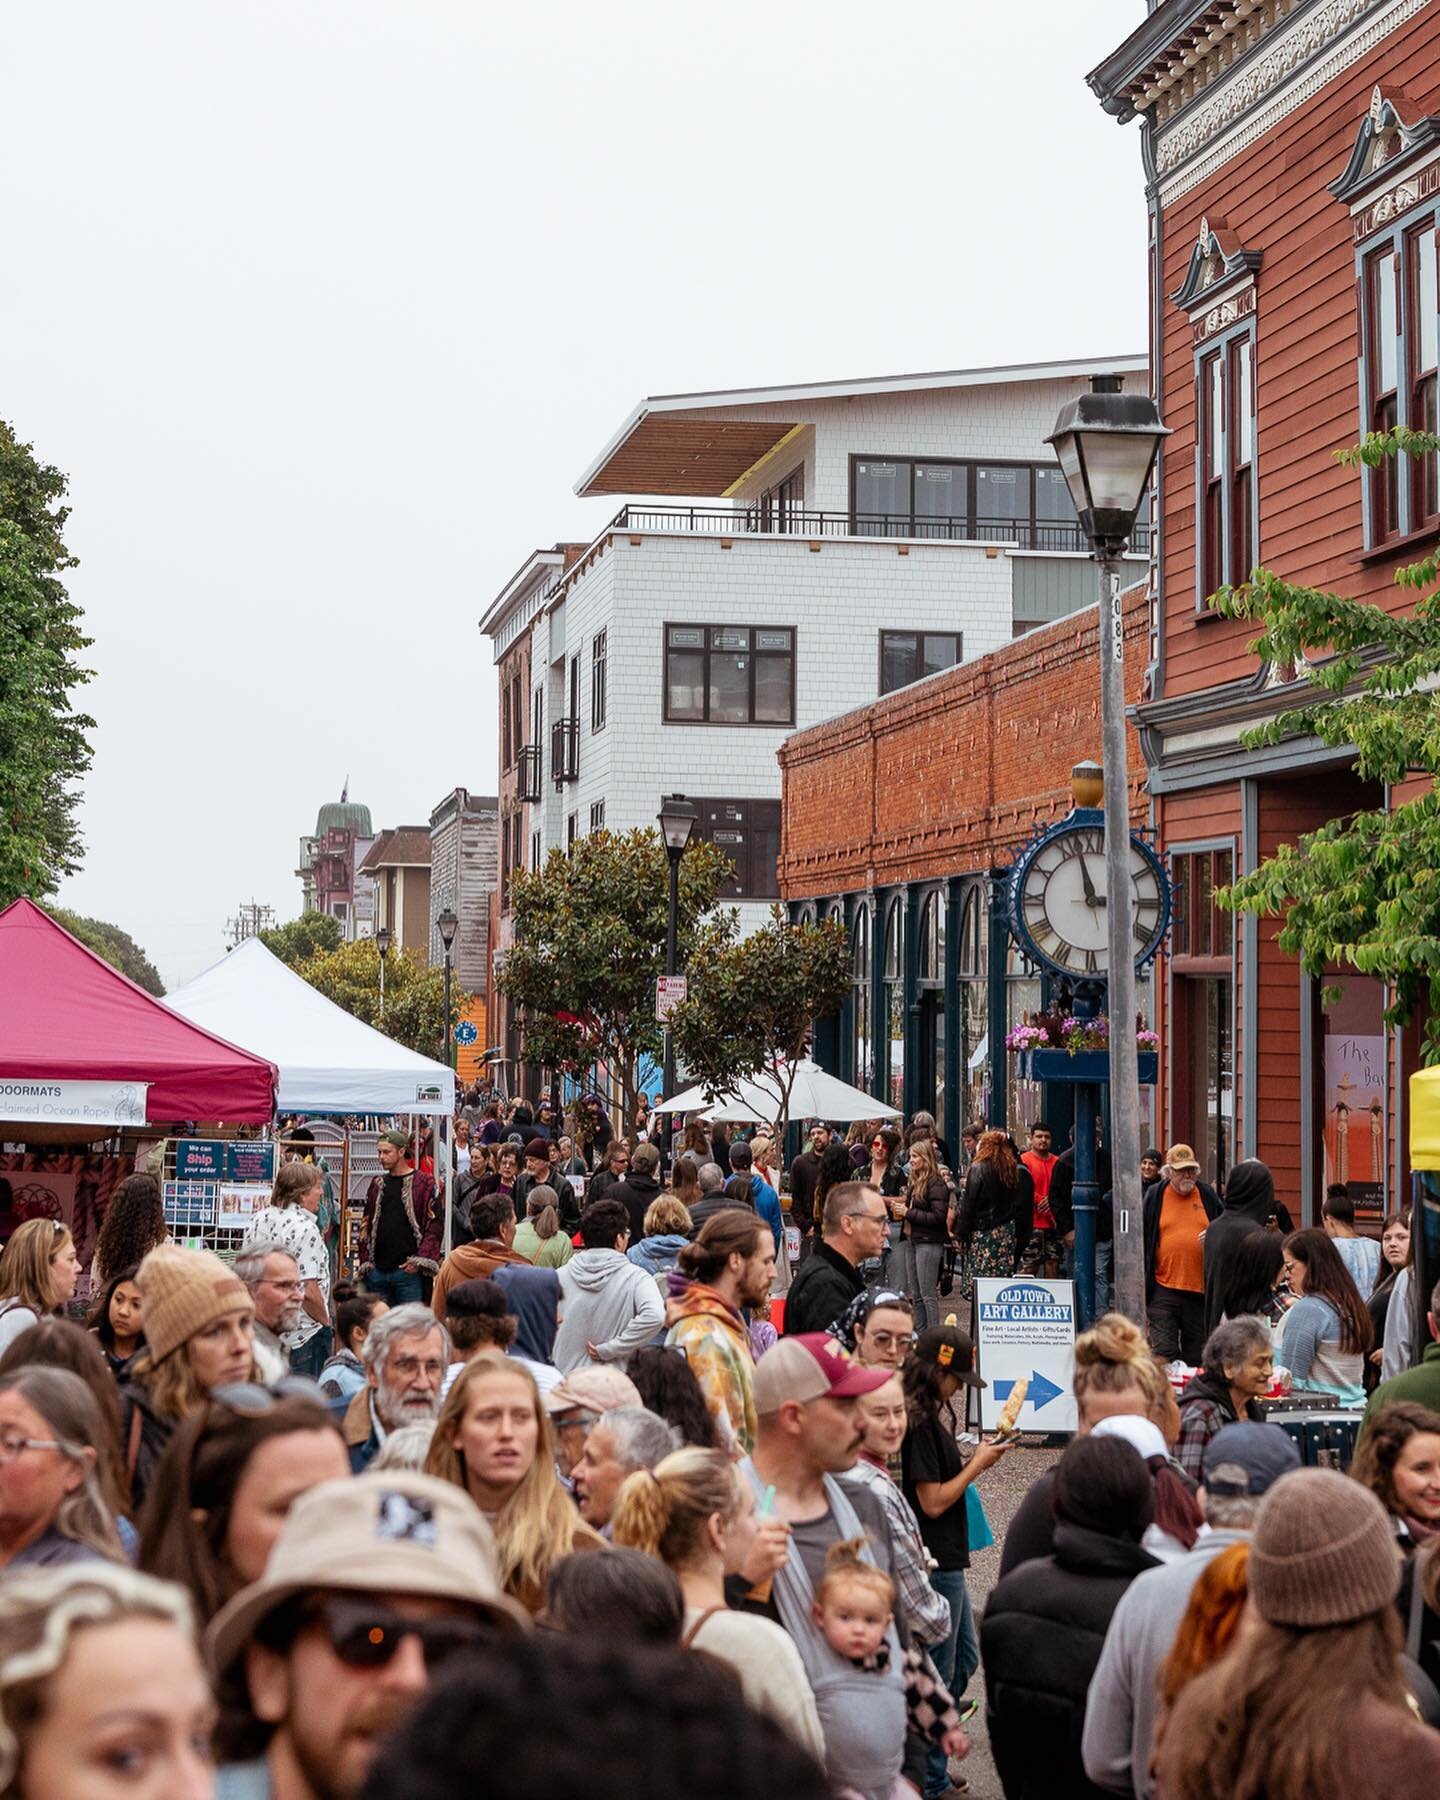 ✨EVERY FRIDAY! 5:30-8:30✨ 
📍Old Town Eureka

Tomorrow we continue kicking off our biggest and best season yet of @eurekafridaynightmarkets ⭐️ This year we are proud to be welcoming our largest lineup of local Artisans, Performers, Chefs and more to 